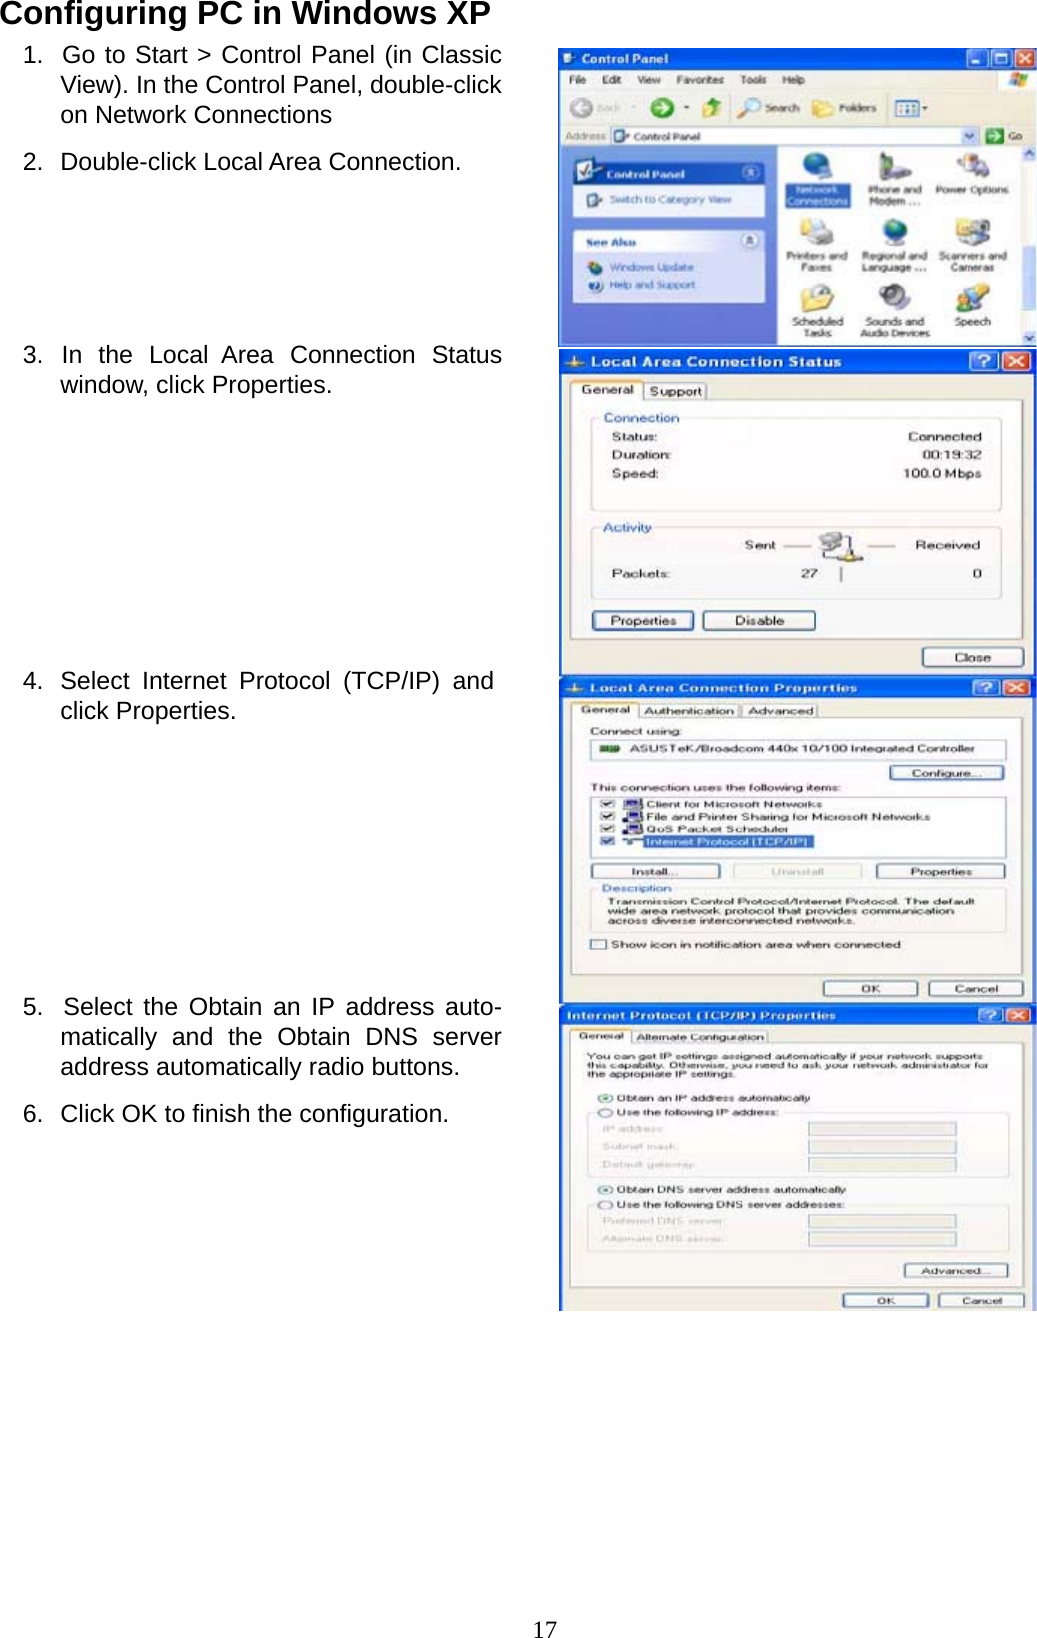 17 Configuring PC in Windows XP 1.  Go to Start &gt; Control Panel (in Classic View). In the Control Panel, double-click on Network Connections  2.  Double-click Local Area Connection.         3.  In  the  Local  Area  Connection  Status window, click Properties.              4.  Select Internet Protocol (TCP/IP) and click Properties.              5.  Select the Obtain an IP address auto- matically and the Obtain DNS server address automatically radio buttons.  6.  Click OK to finish the configuration. 